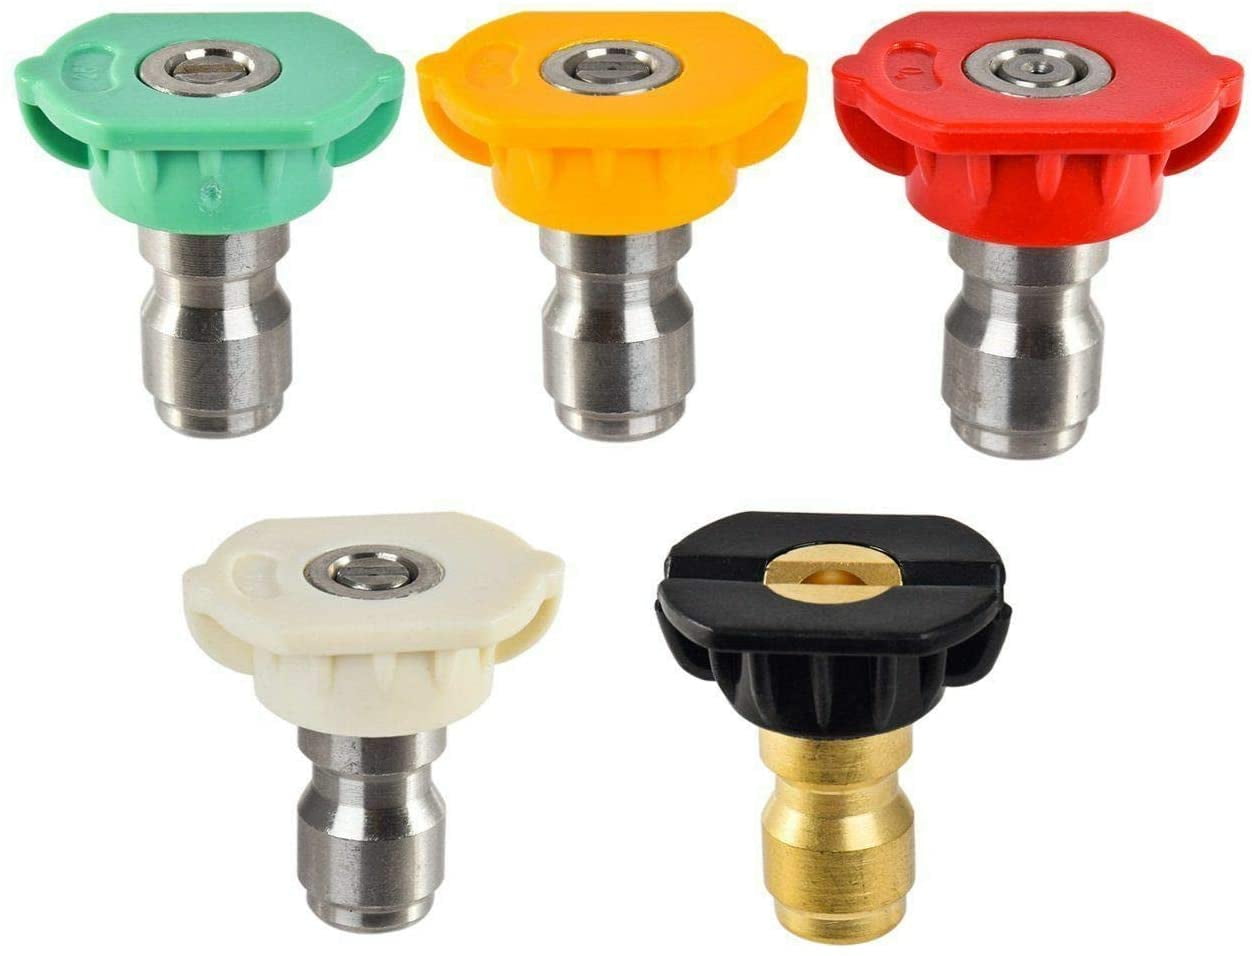 5pcs Pressure Washer Spray Tips Nozzles High Power Kit Quick Connect 1/4" Set